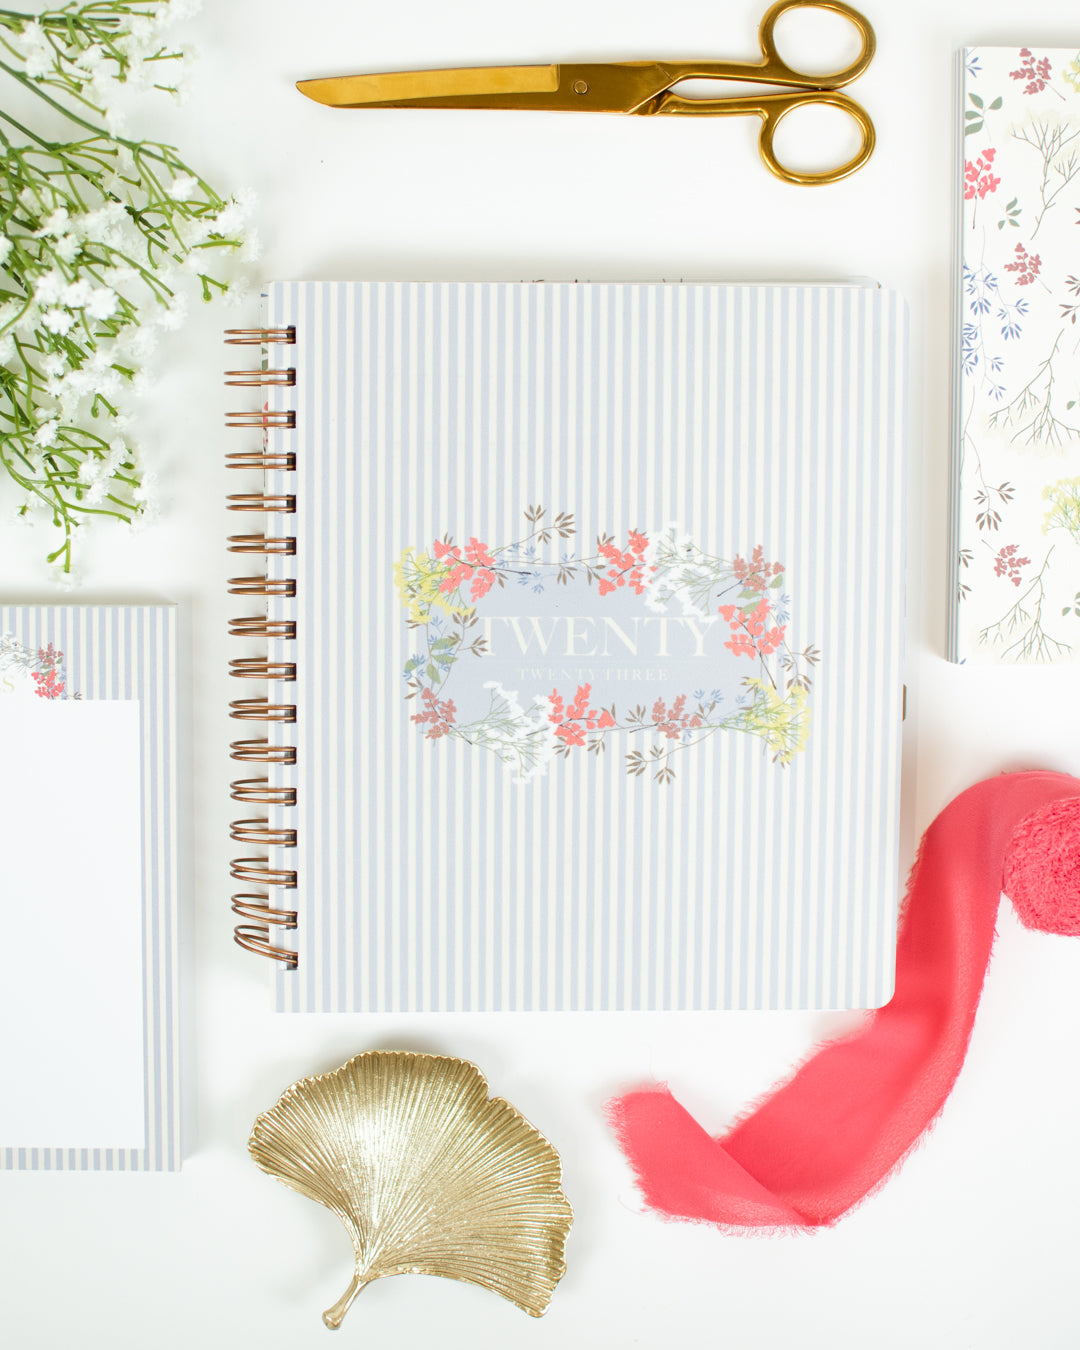 2023 Life + Style Weekly Planner: The Claire